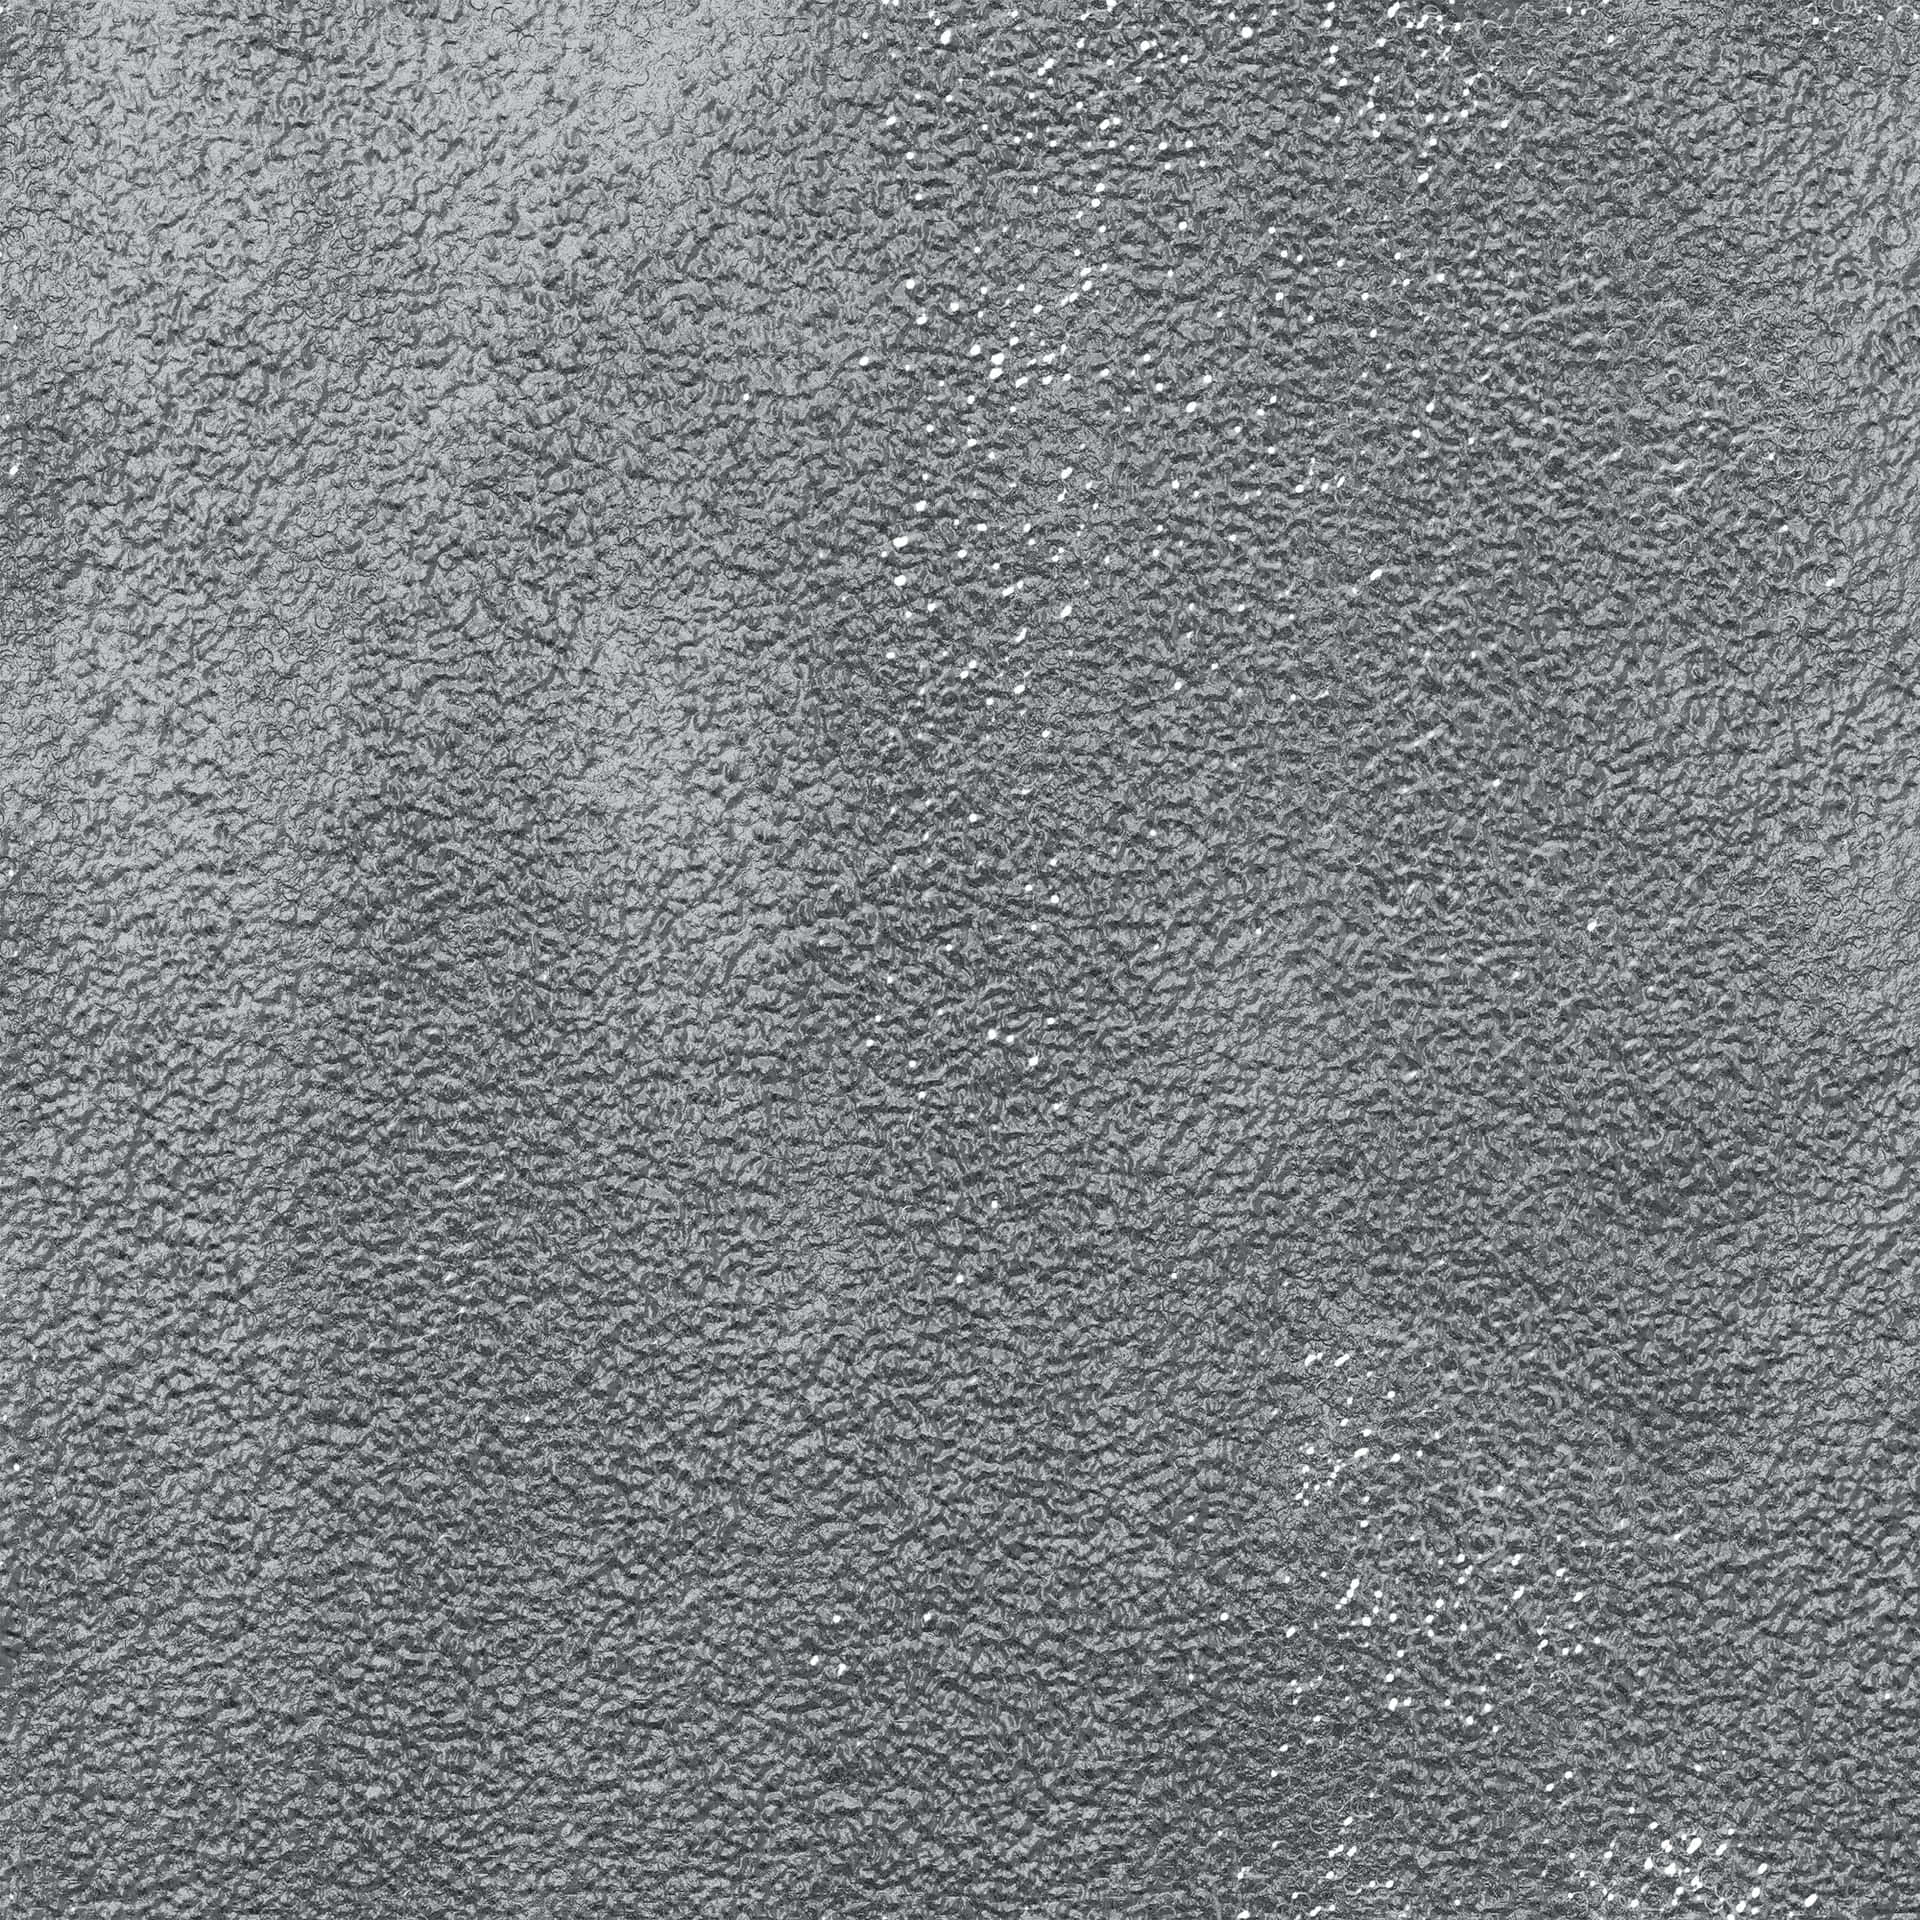 Grey Texture Pattern Created by Abstract Lines